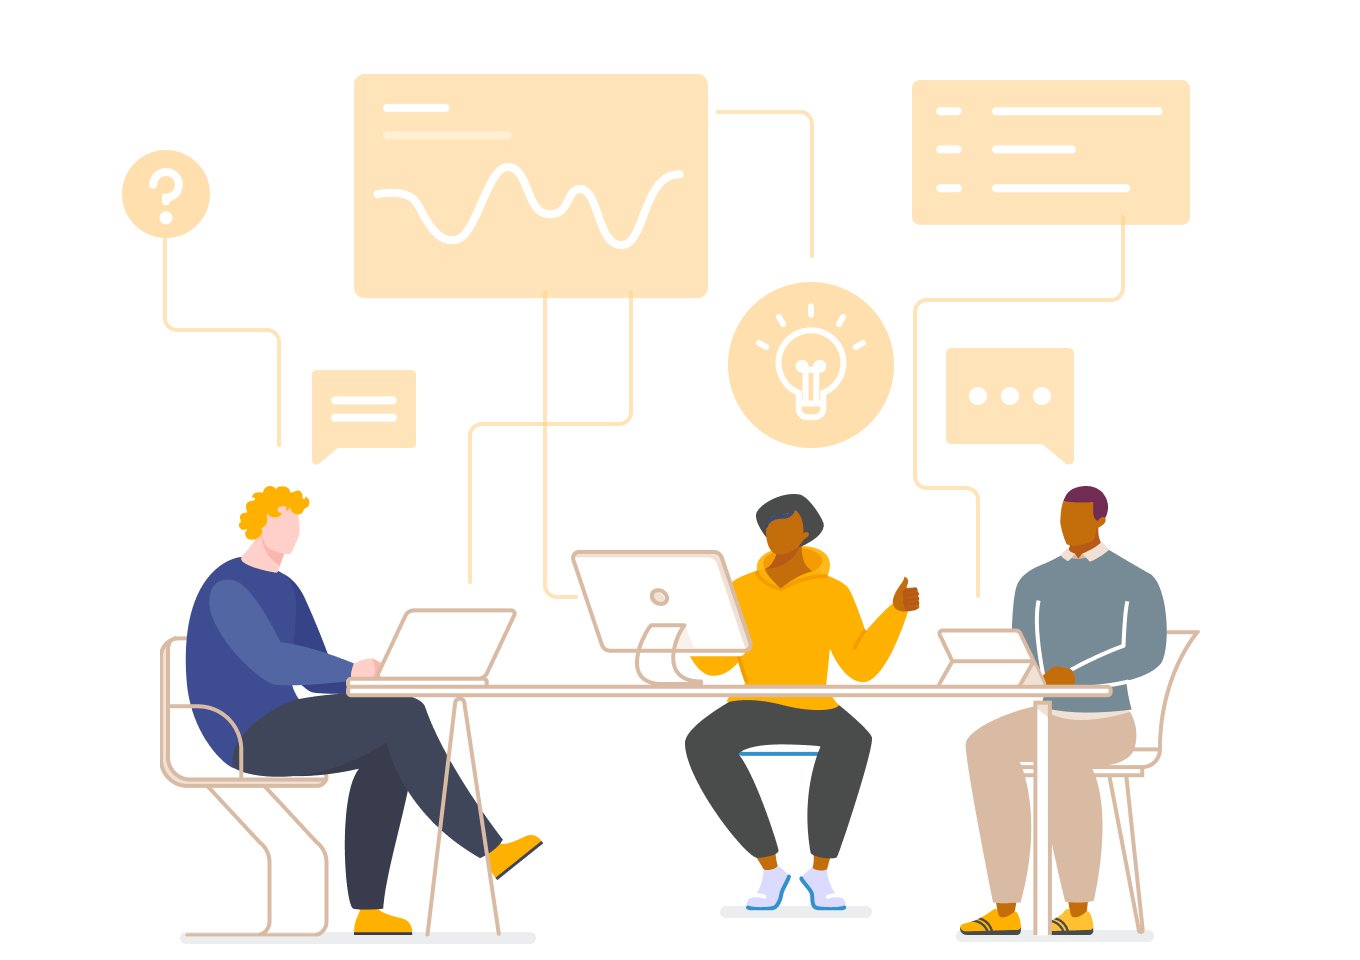 Illustration - a group of software experts